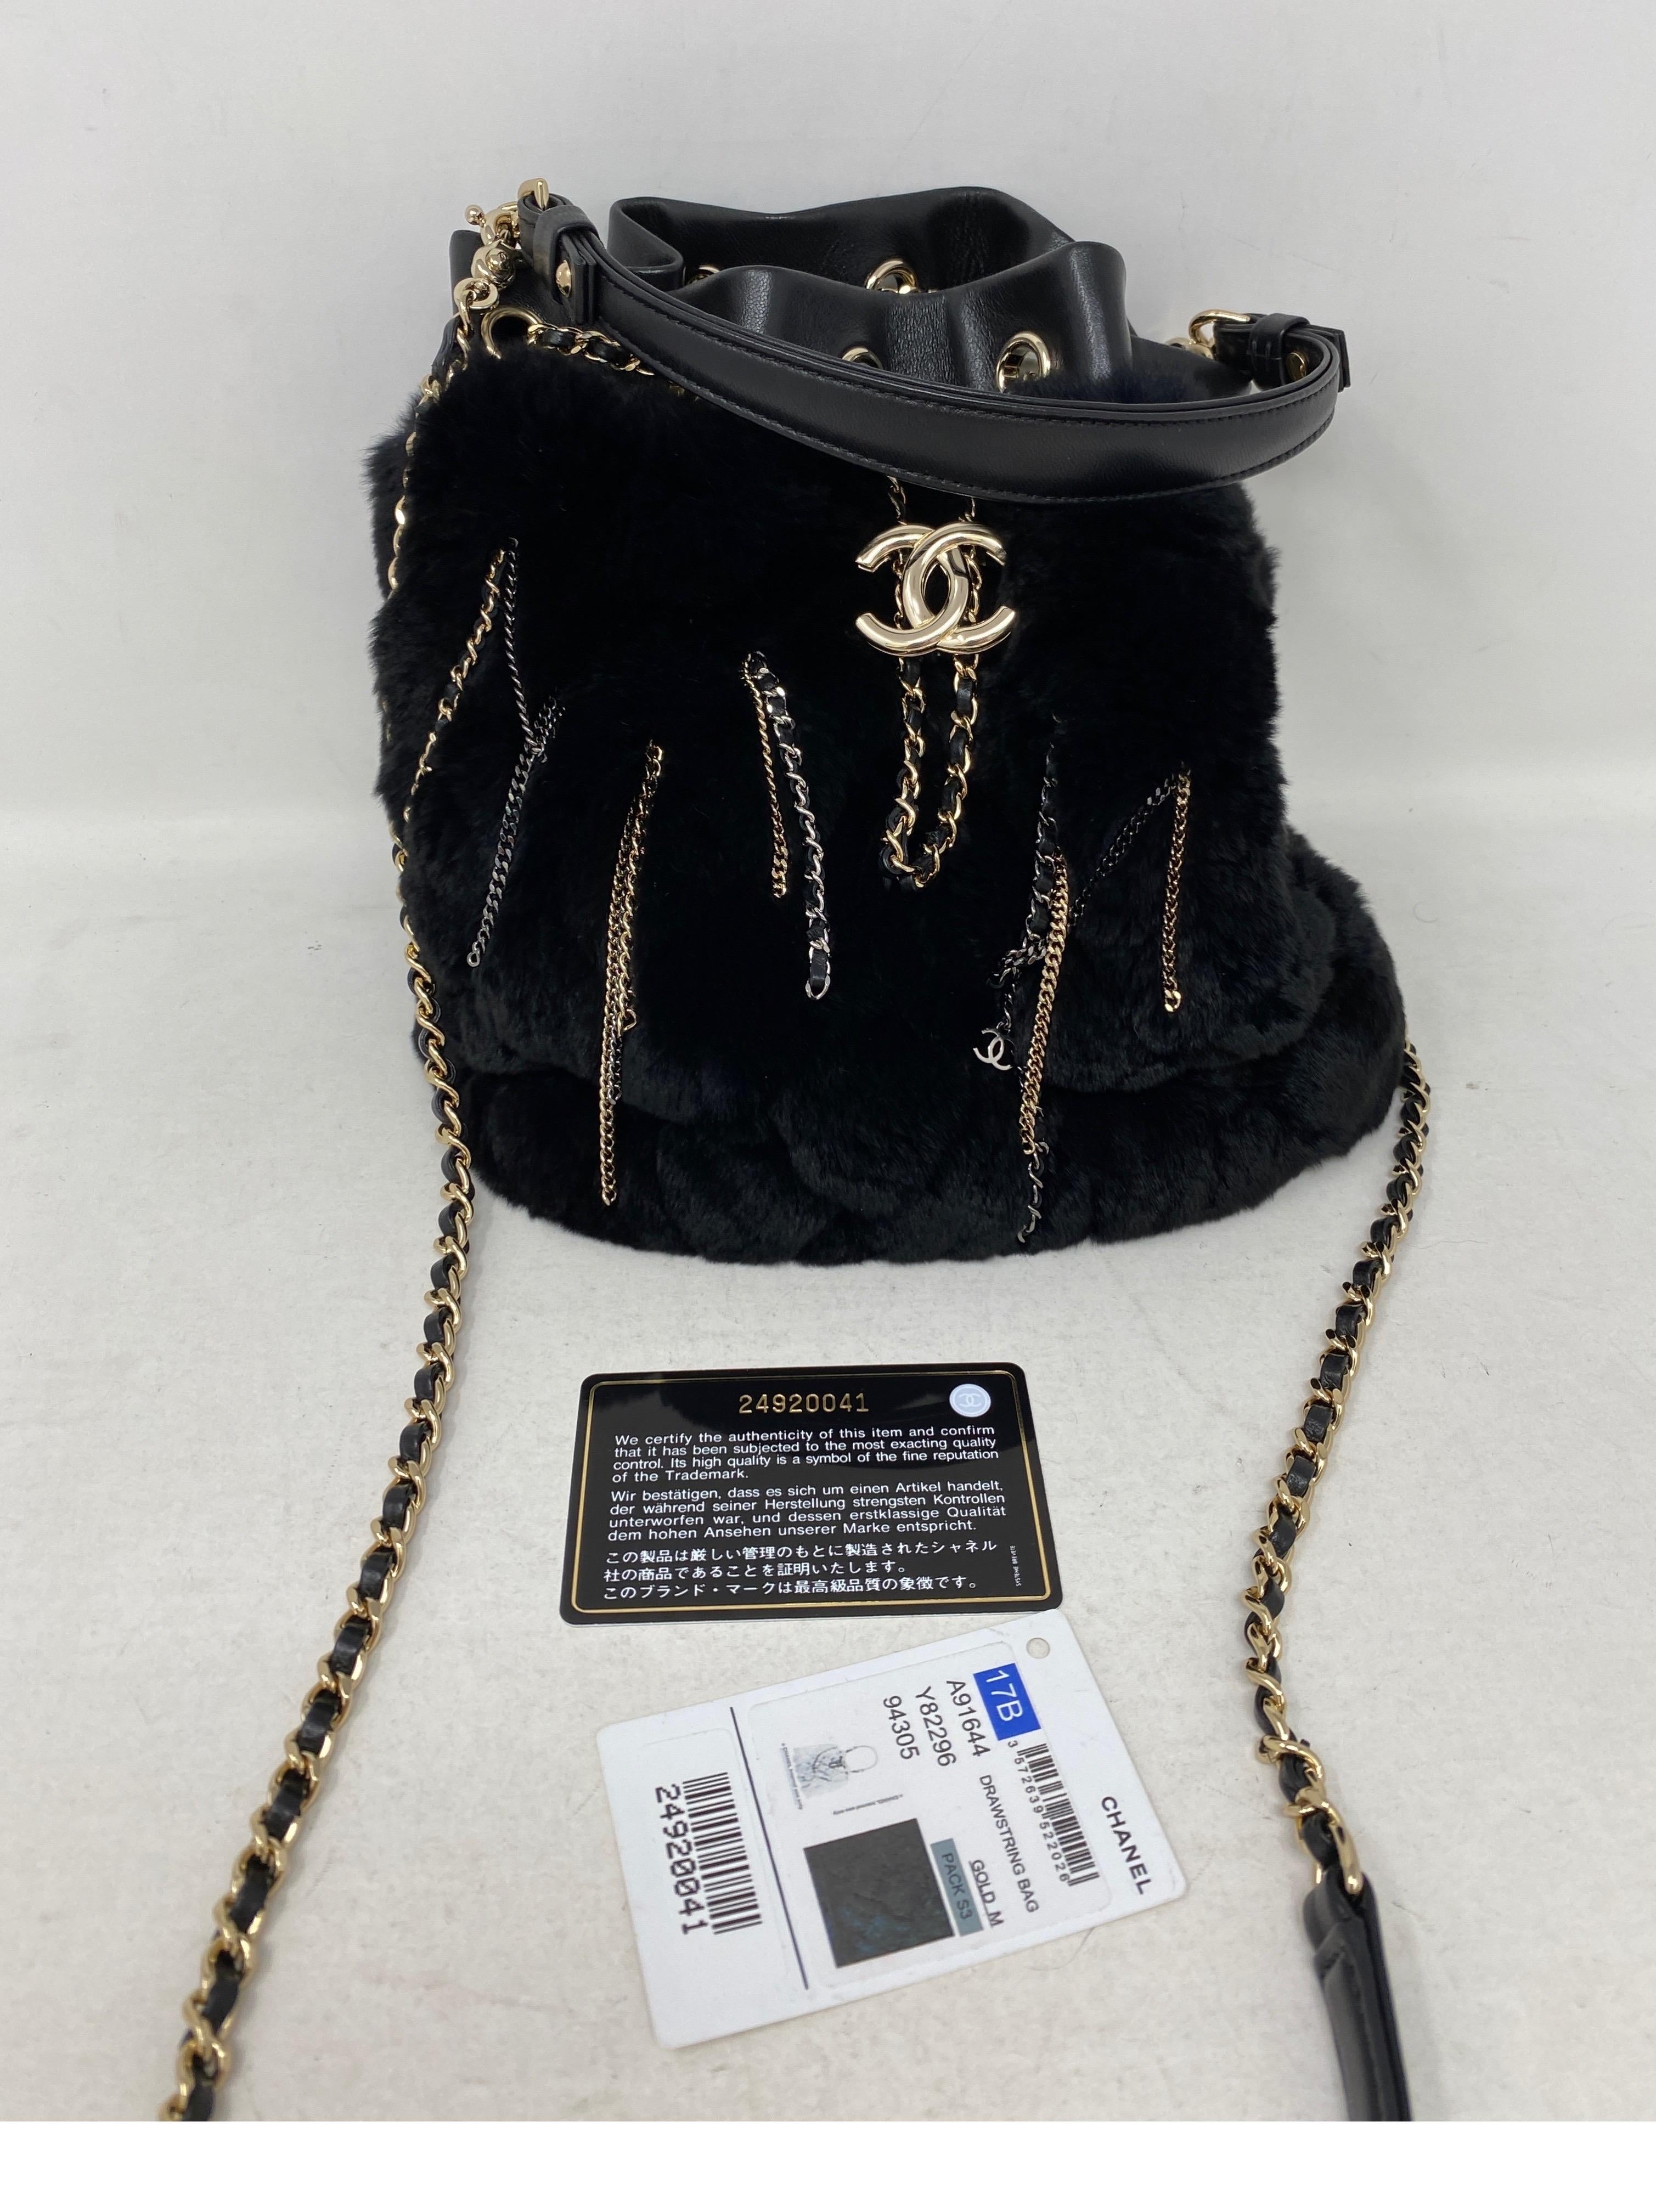 Chanel Black Mink Fur Bucket Bag. Gold chains details. Rare and limited bucket syle bag. Soft black mink fur and black leather bag. Mint like new condition. Includes original tag and authenticity card. Guaranteed authentic. 